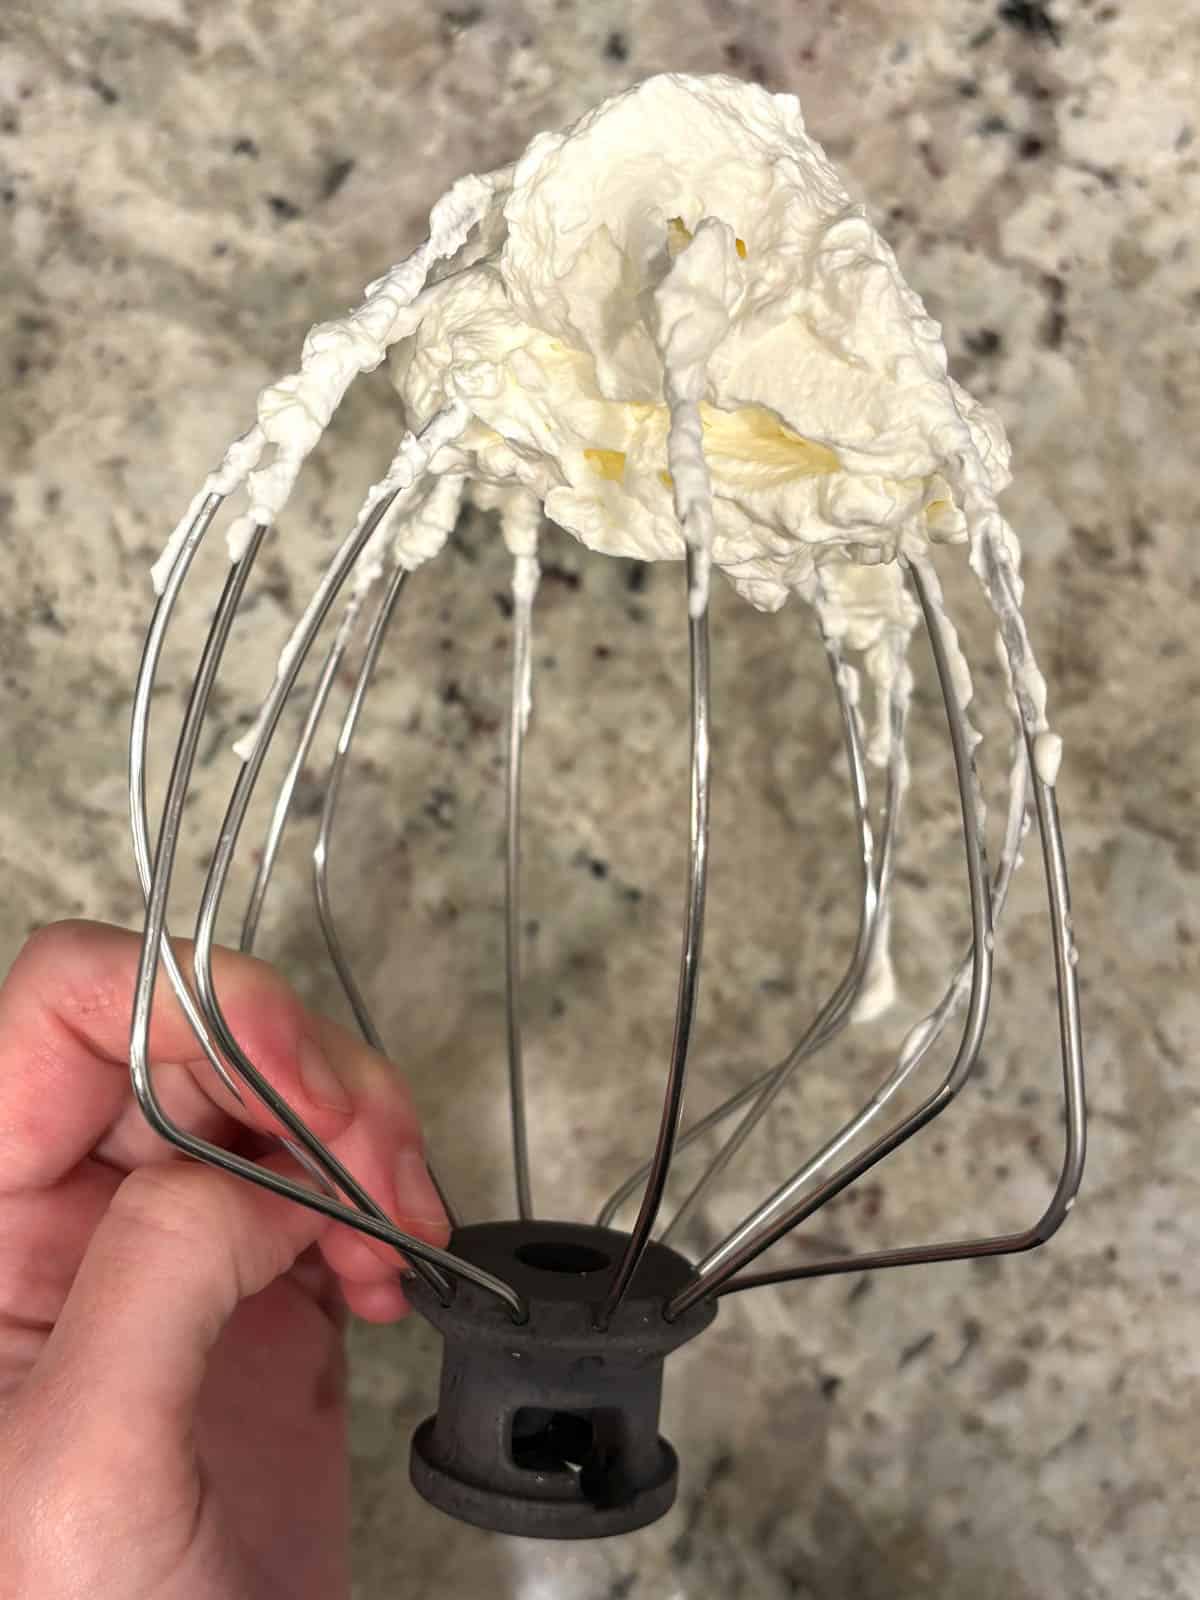 Heavy cream whipped to stiff peaks on a whisk attachment.